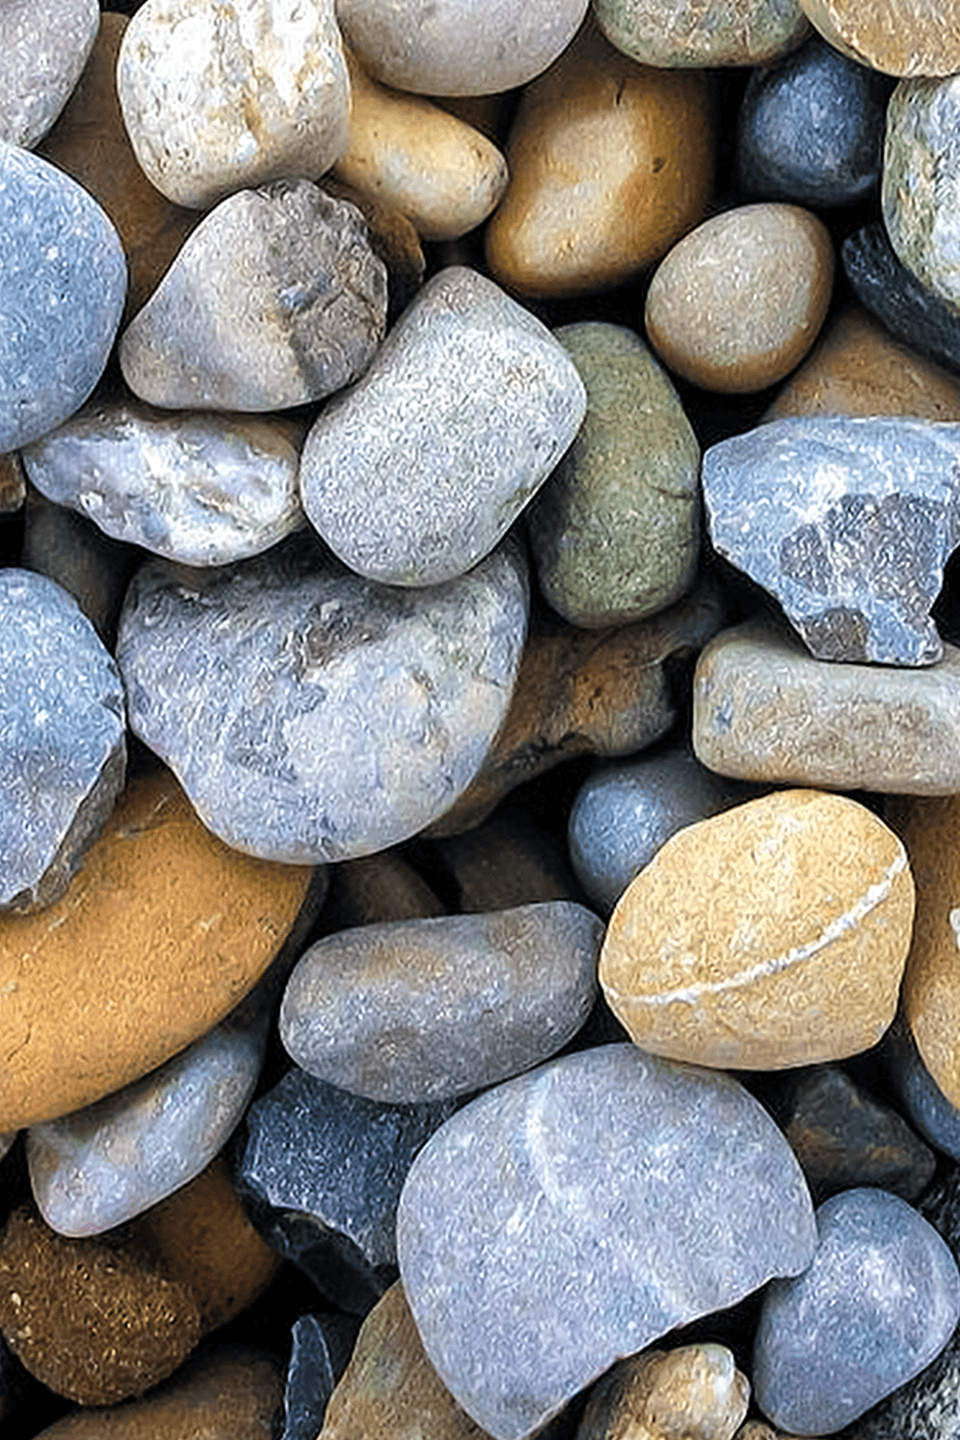 Colourful Pebble Stones iPhone Wallpaper HD - iPhone Wallpapers